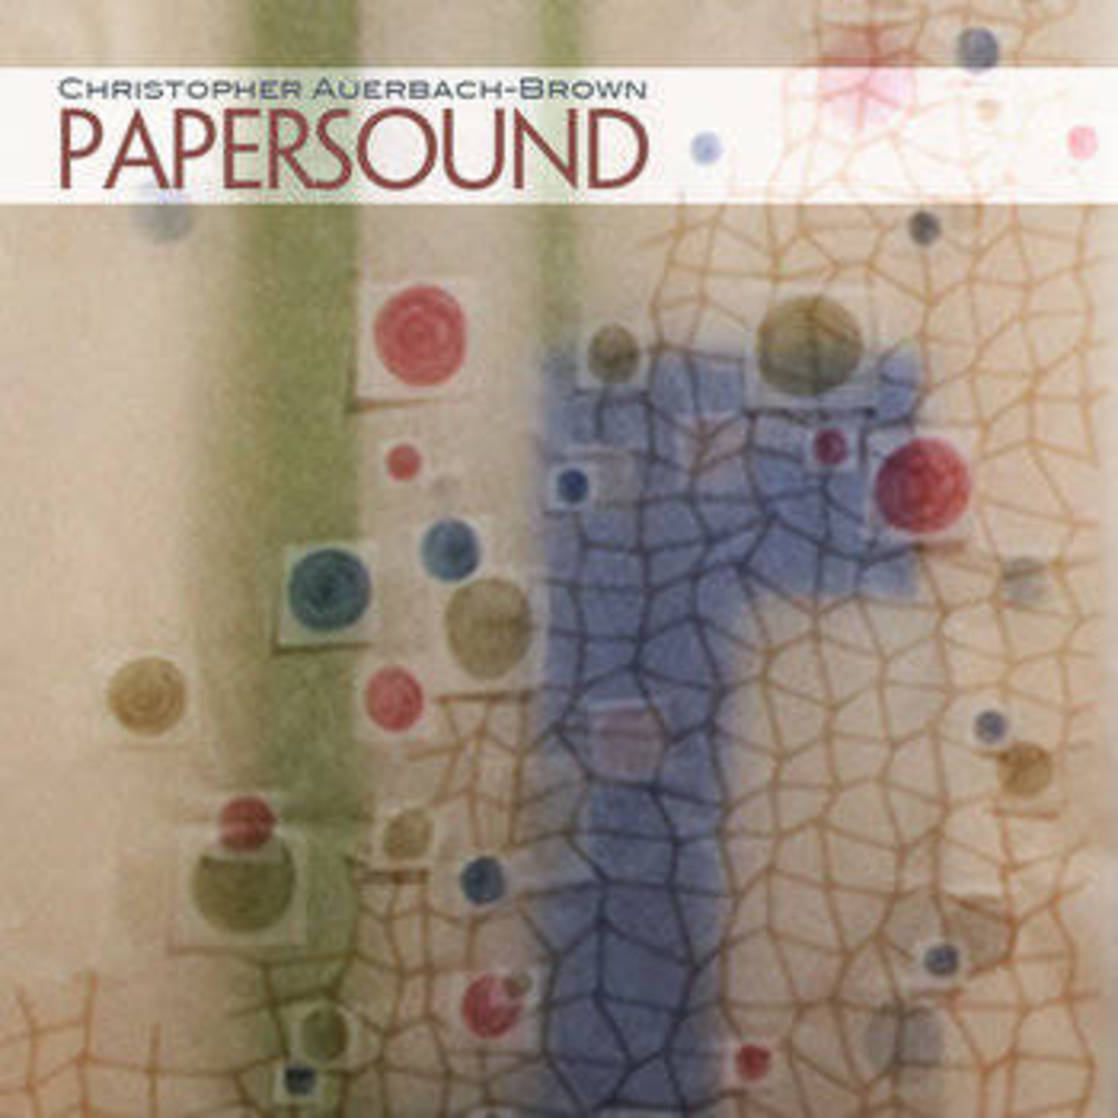 Papersound